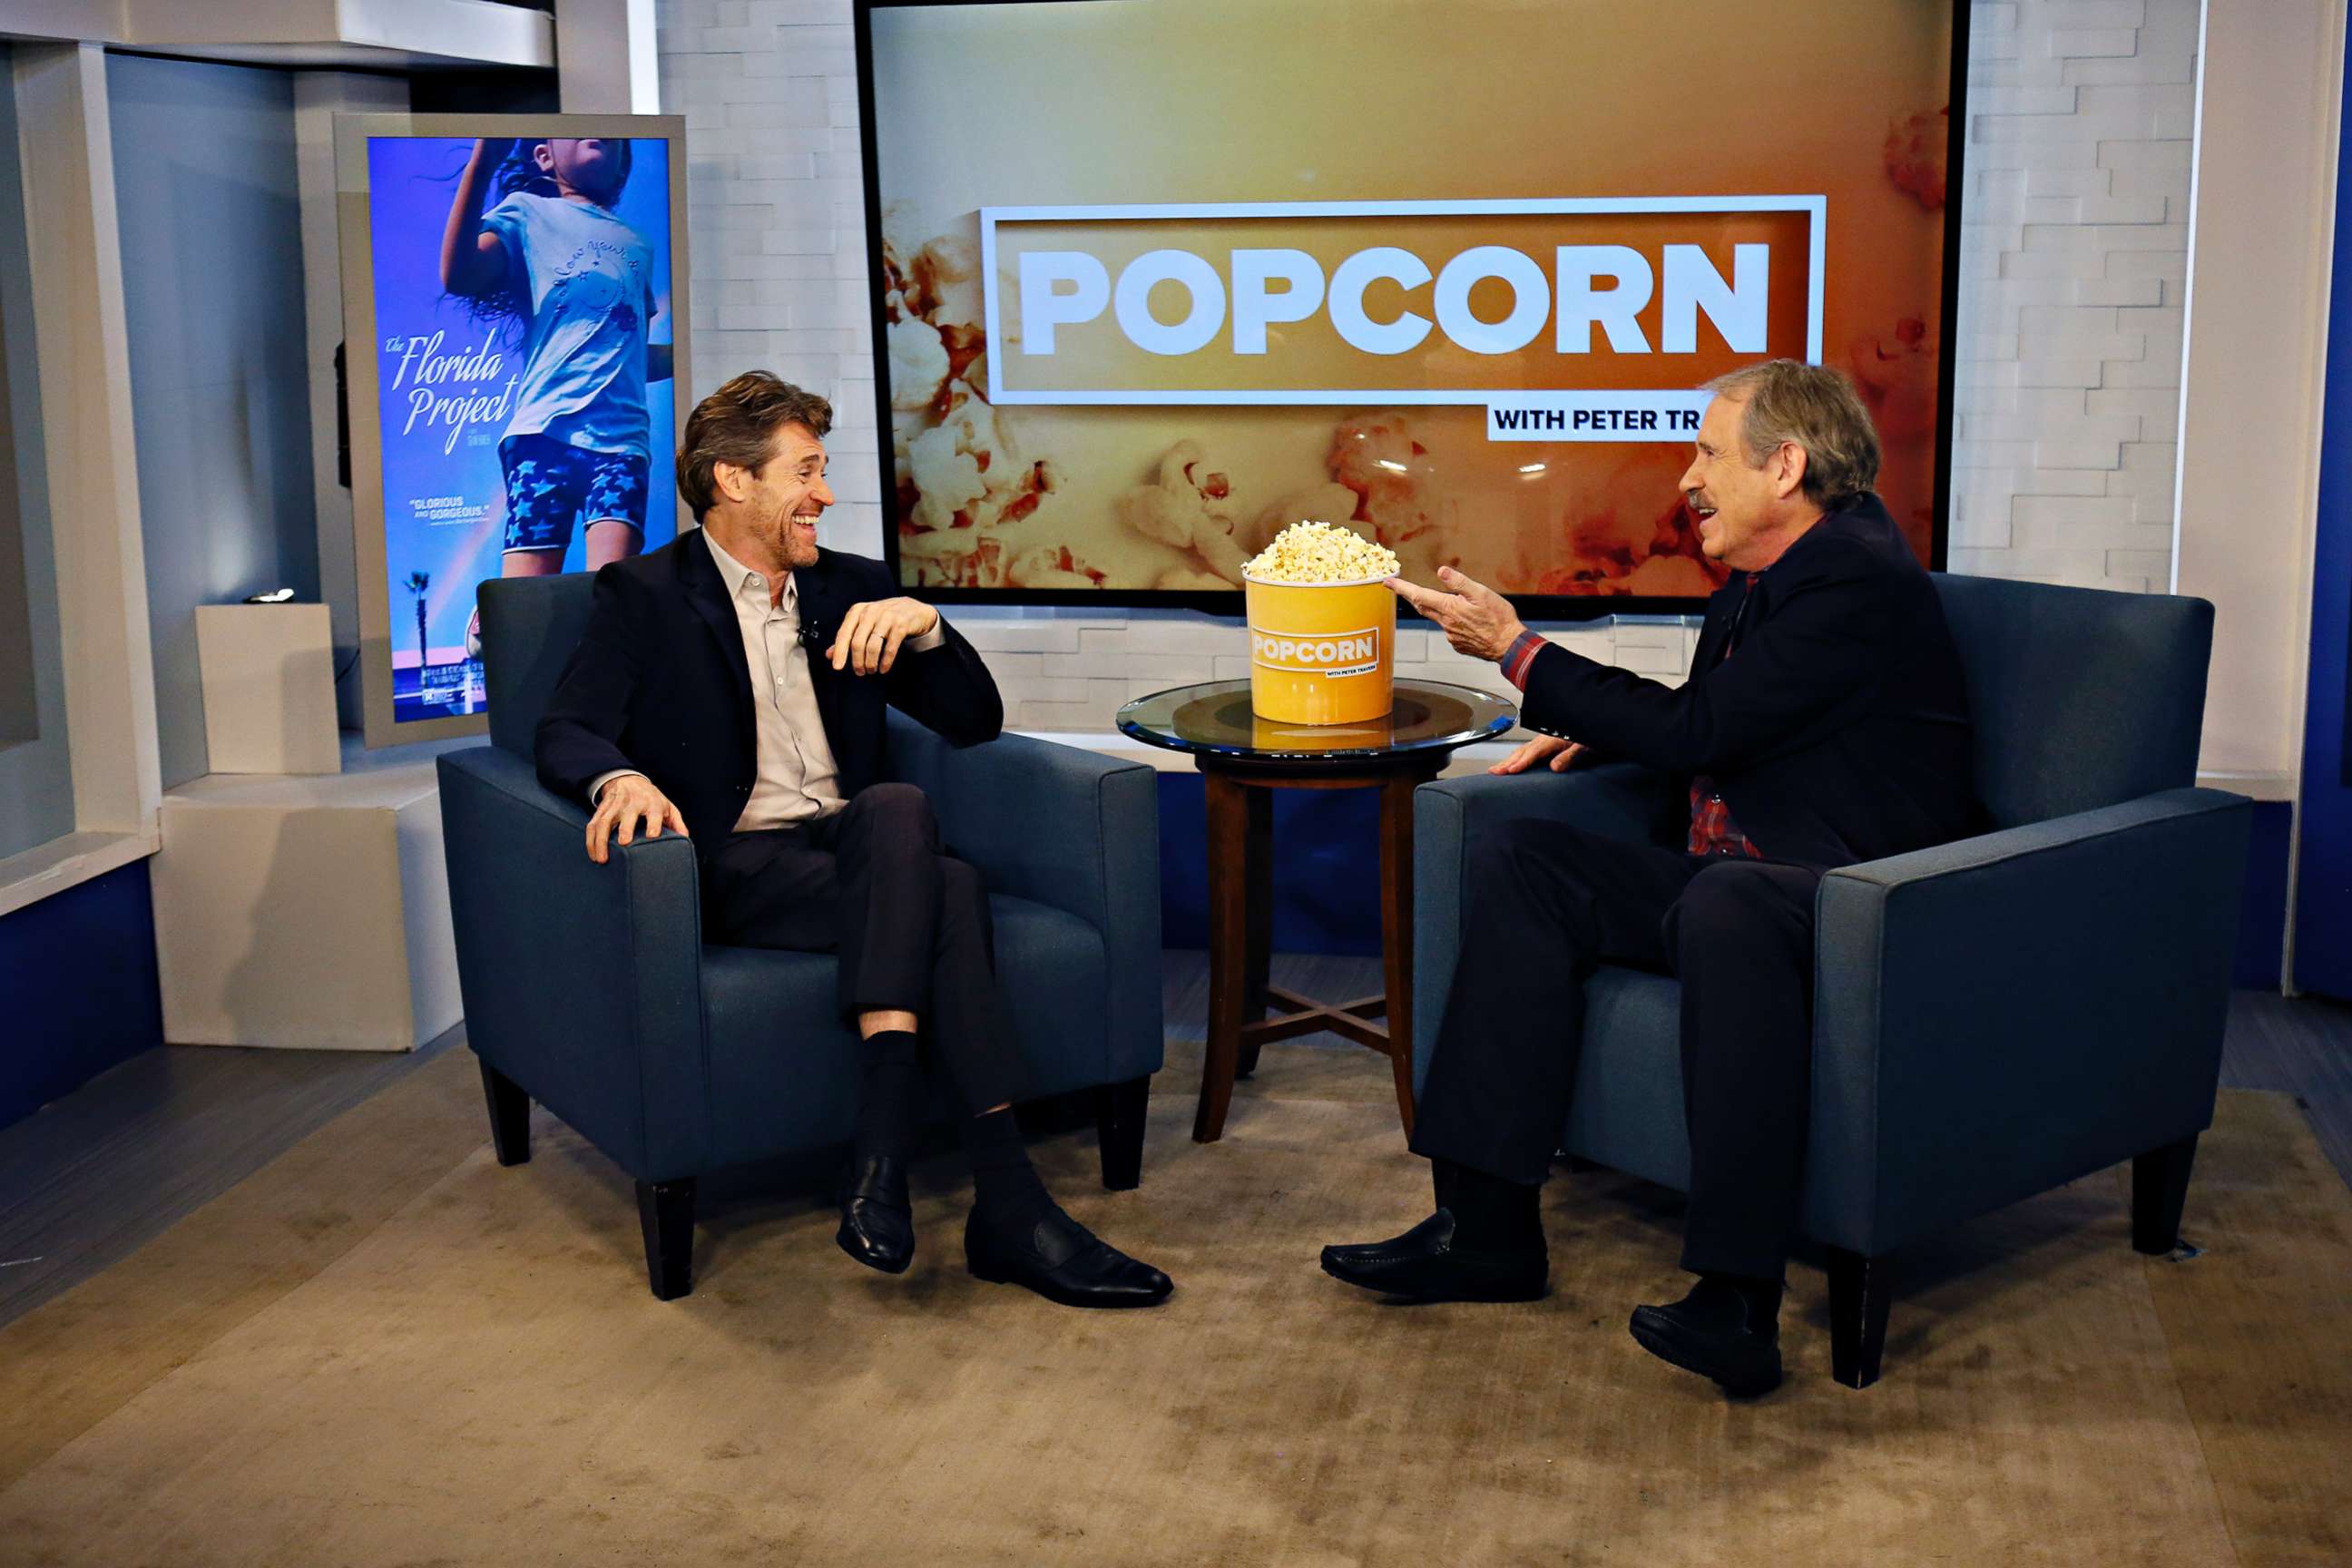 PHOTO: Willem Dafoe appears on "Popcorn with Peter Travers" at ABC News studios, Oct. 02, 2017, in New York City.